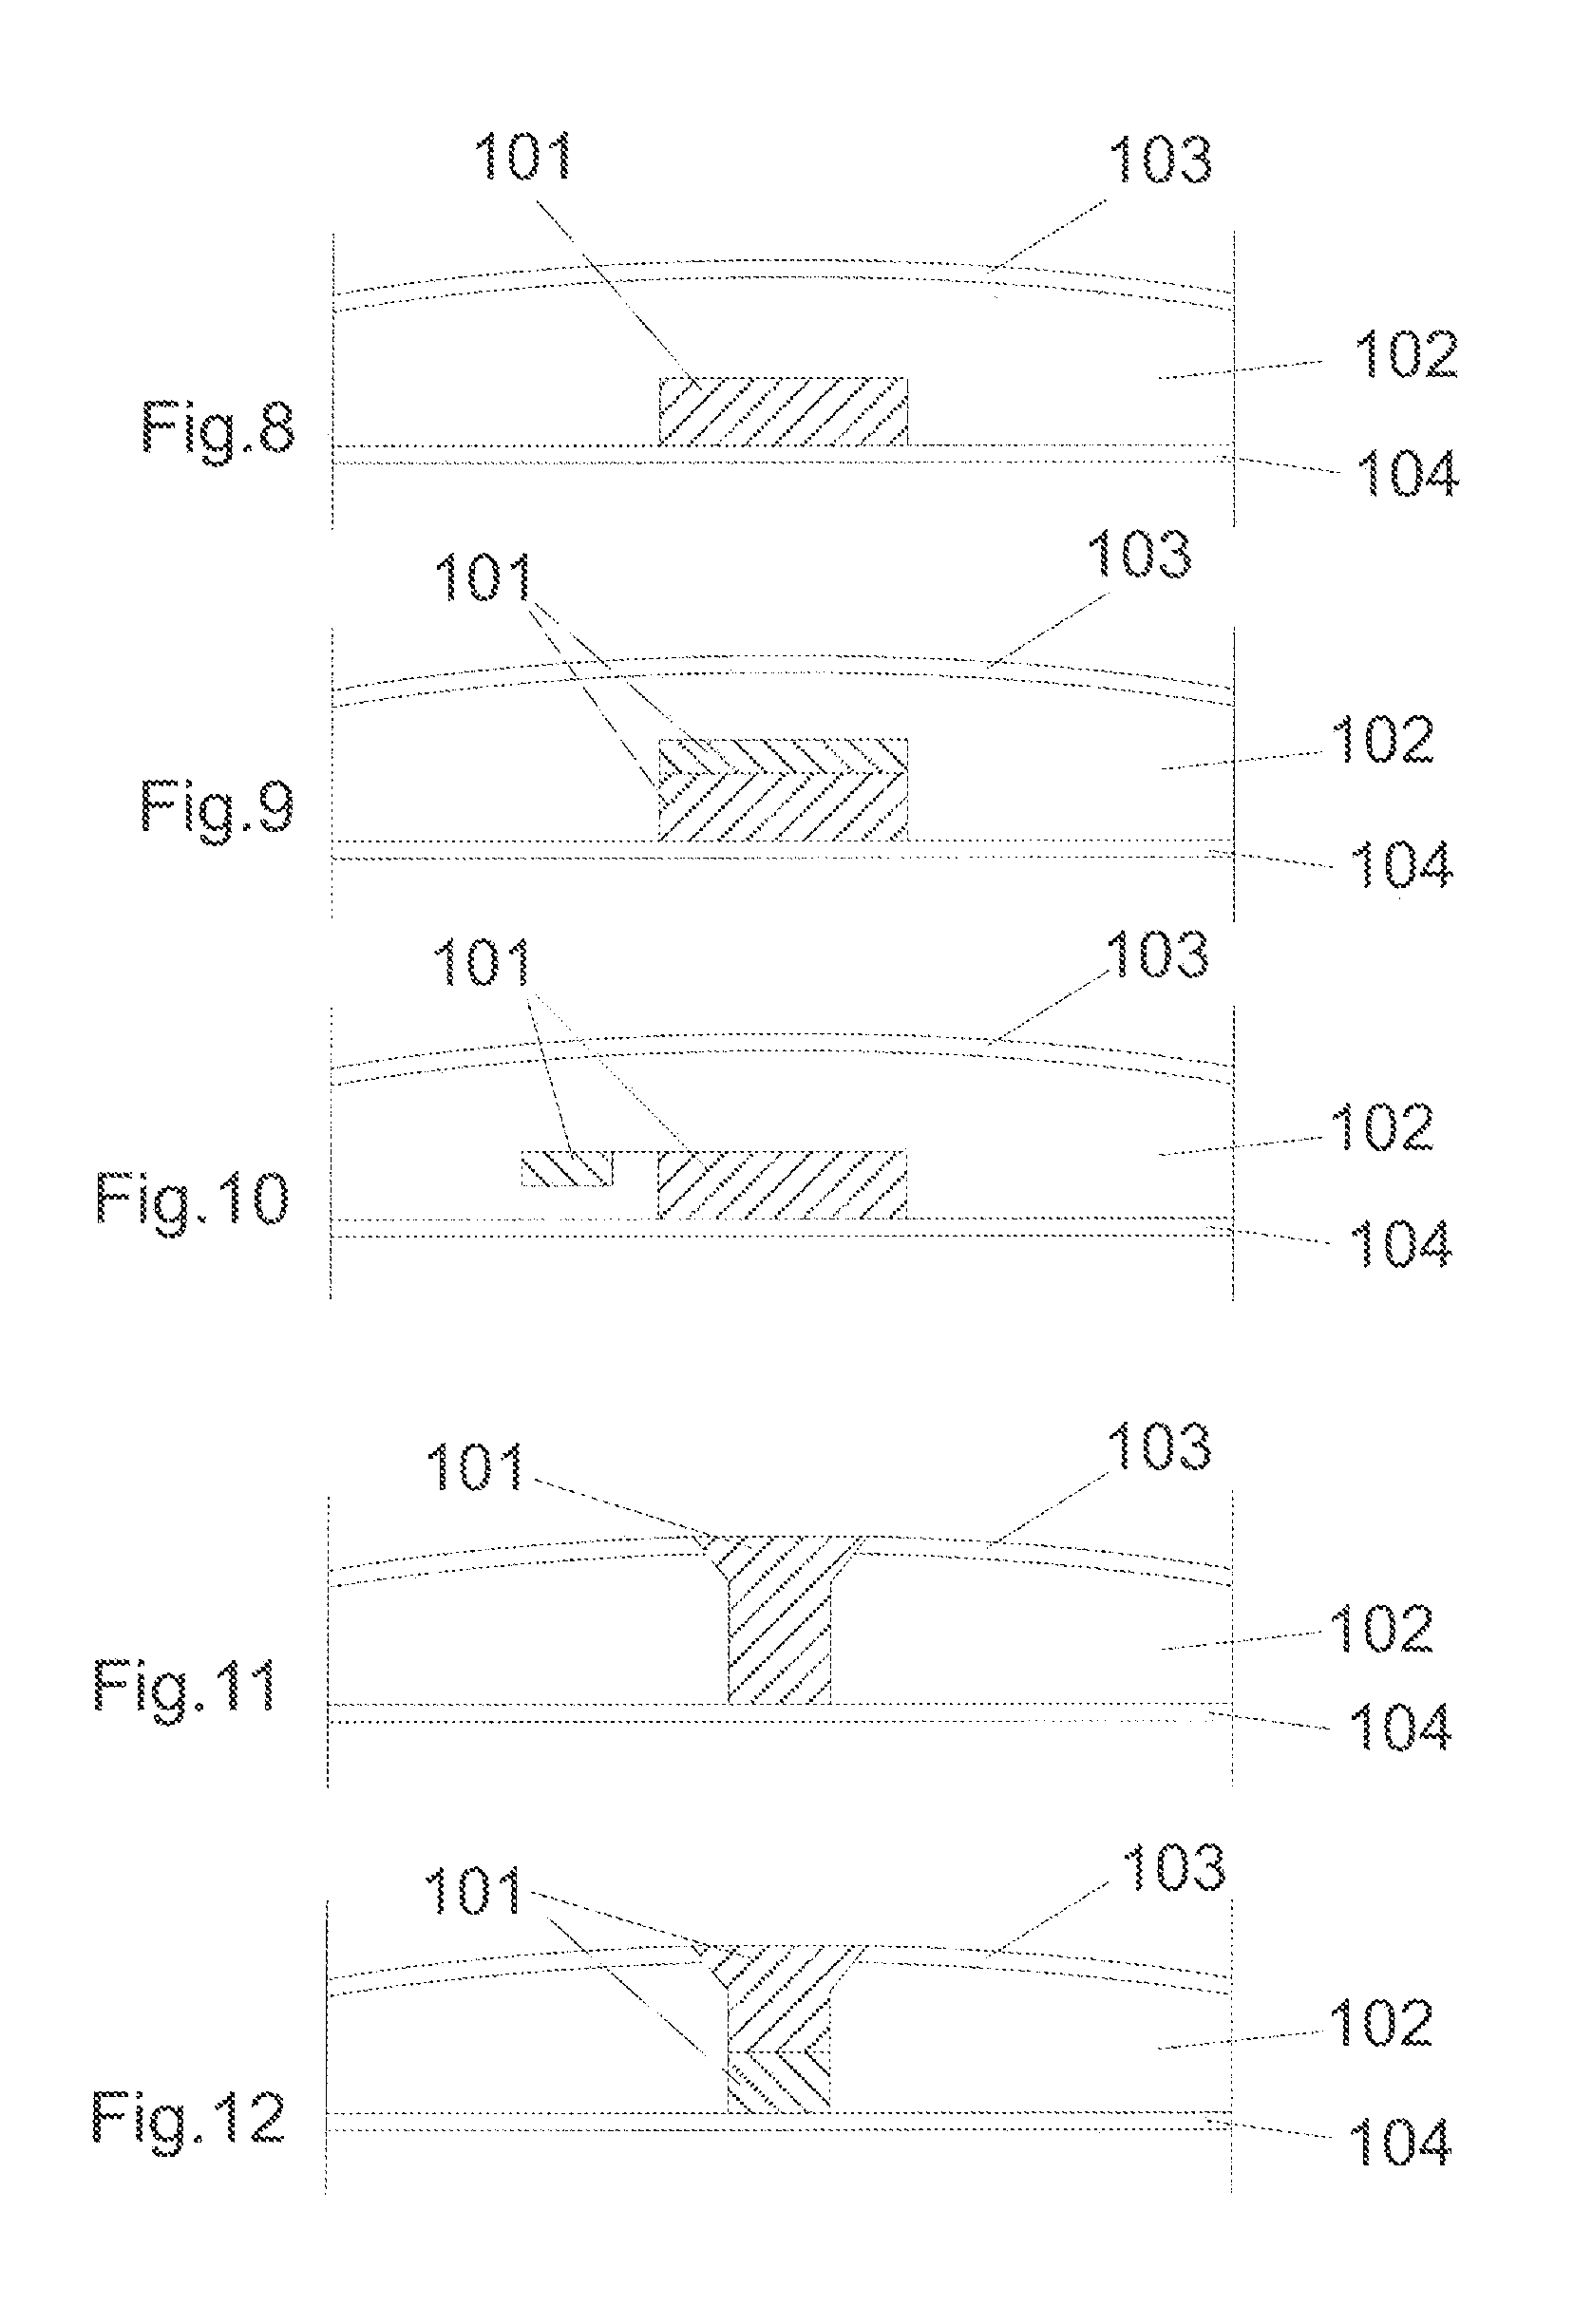 Three-dimensional adhesive device having a microelectronic system embedded therein